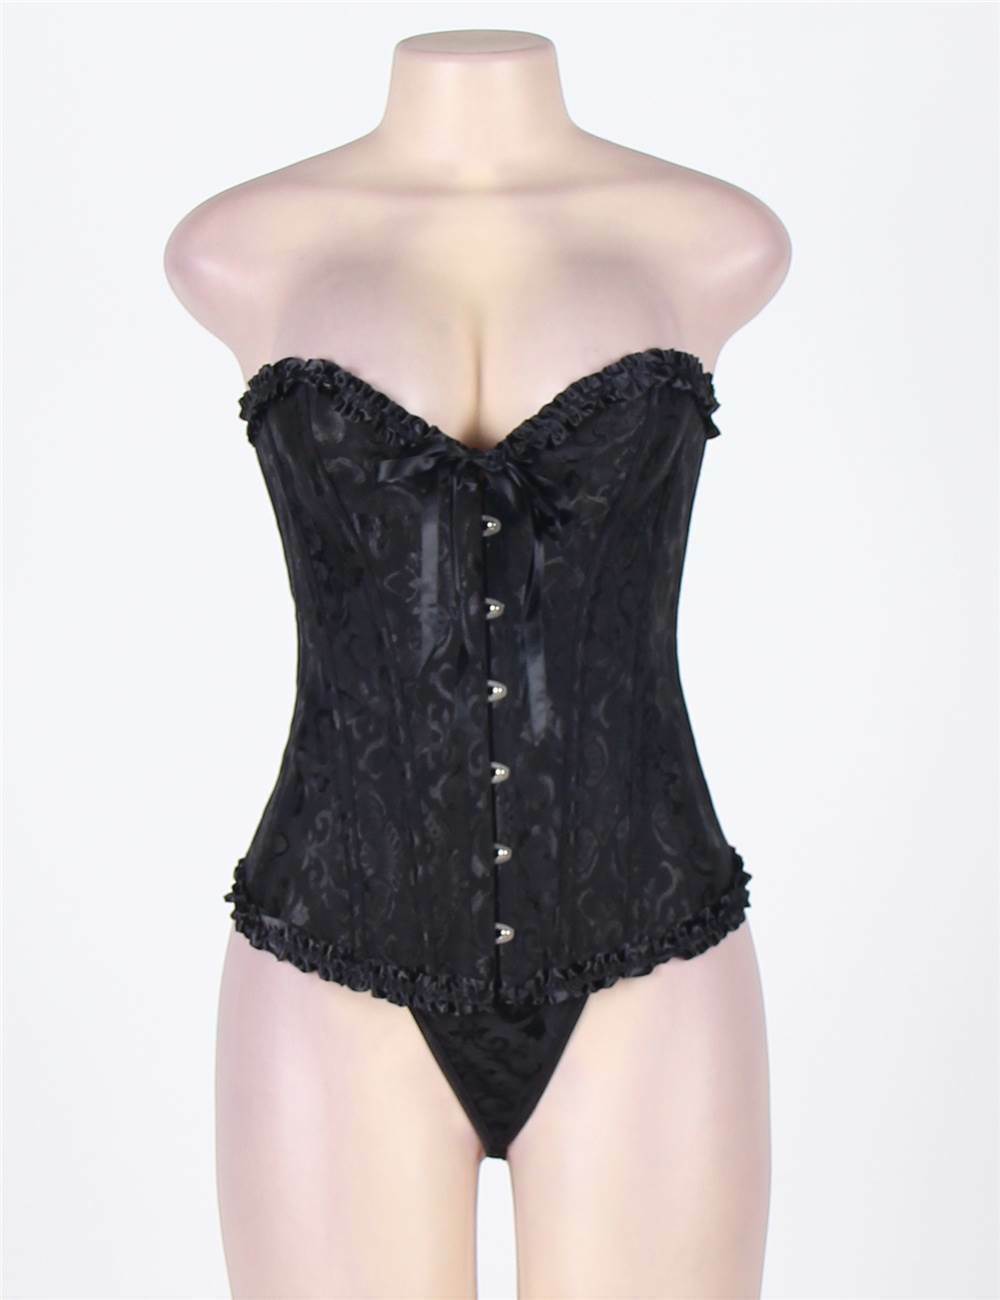 Corset BUSTIER Black Brocade Sizes S to 6XL STUNNING for evening